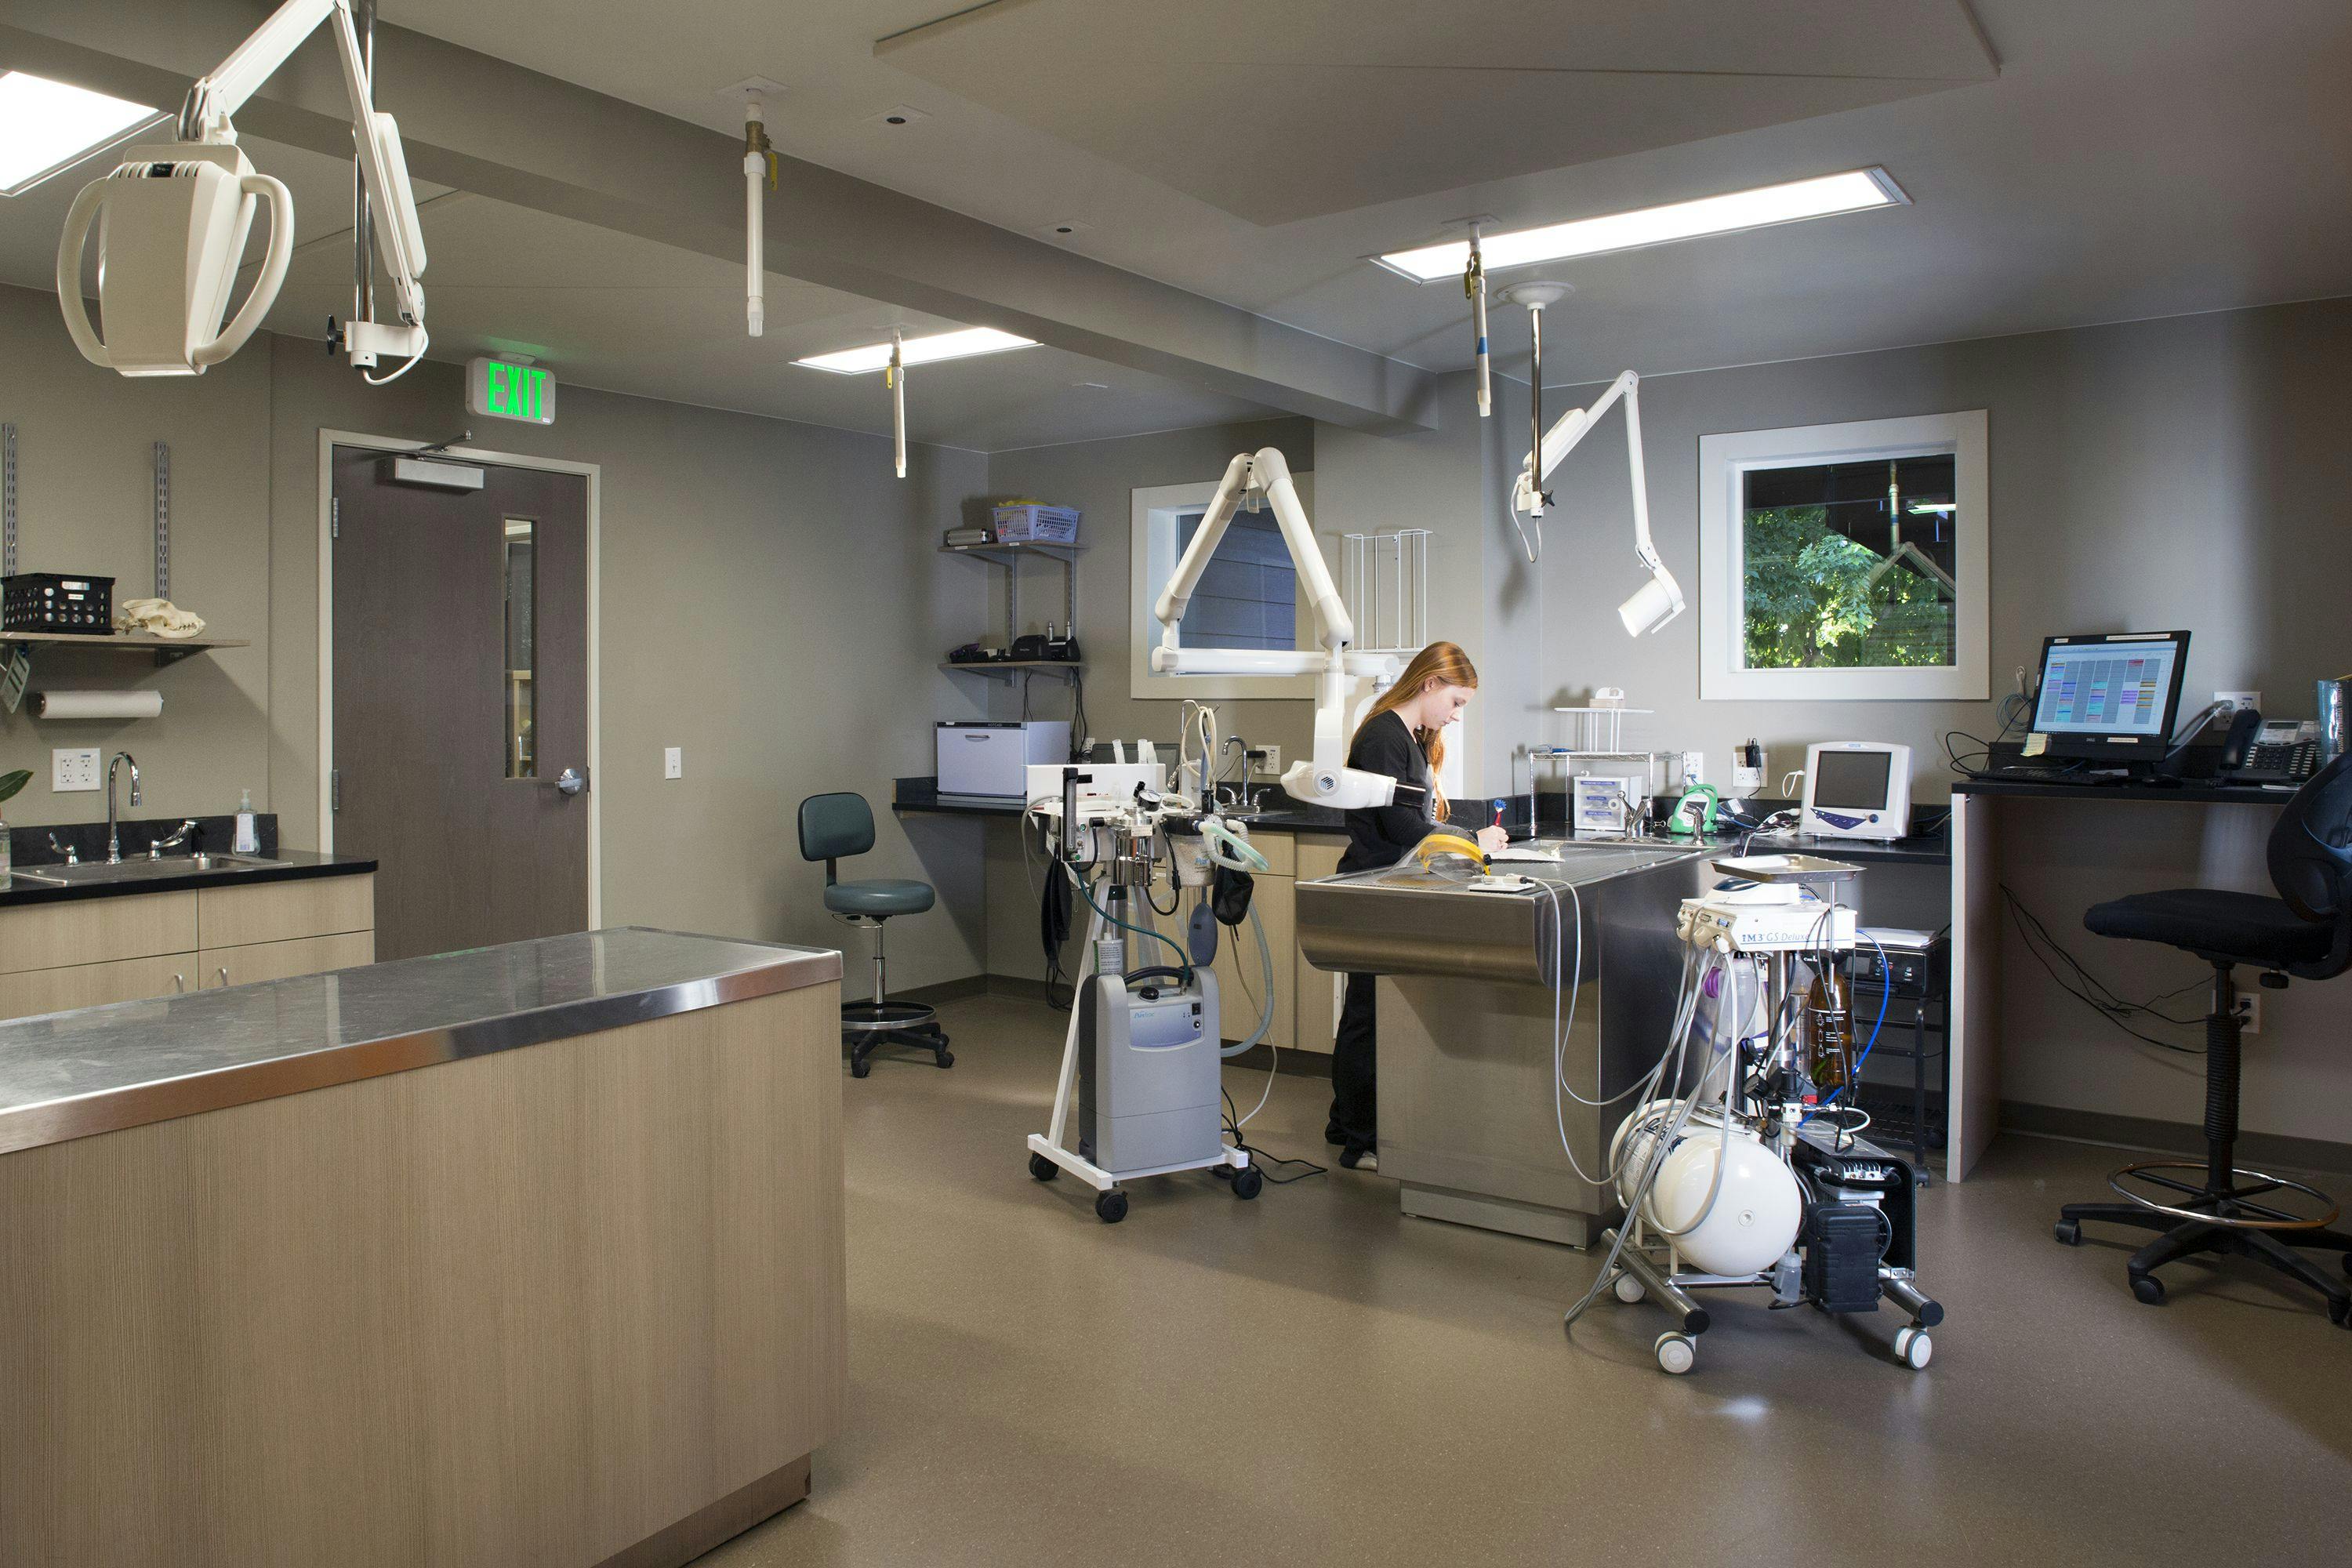 The dedicated dental area at the new hospital. (Photo by Tim Murphy / Foto Imagery)